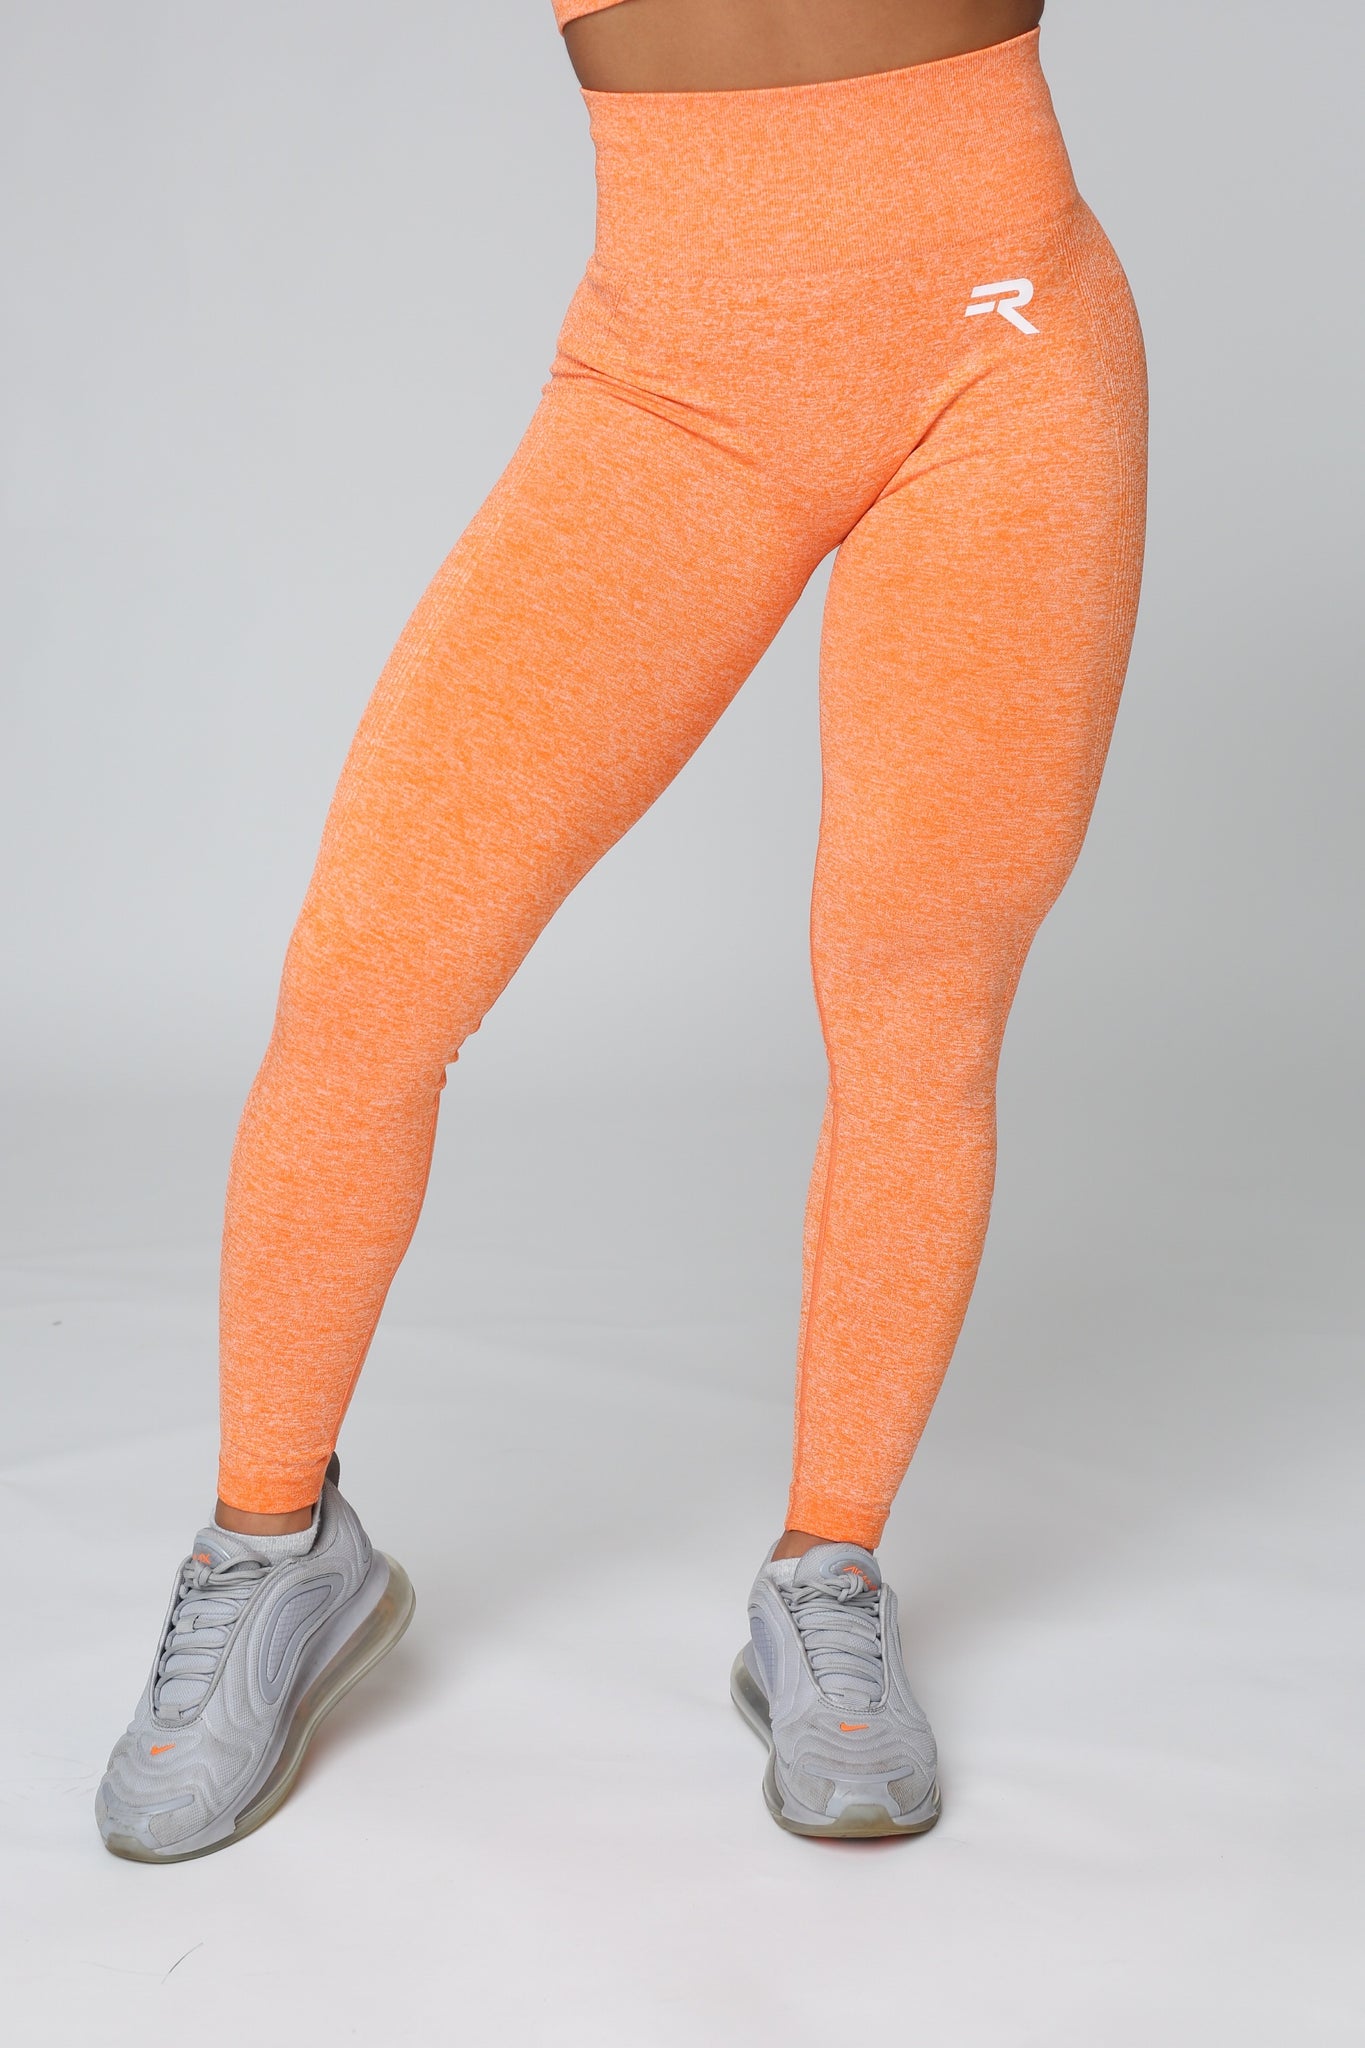 Buy Women's Orange Cotton Solid Leggings Online In India At Discounted  Prices